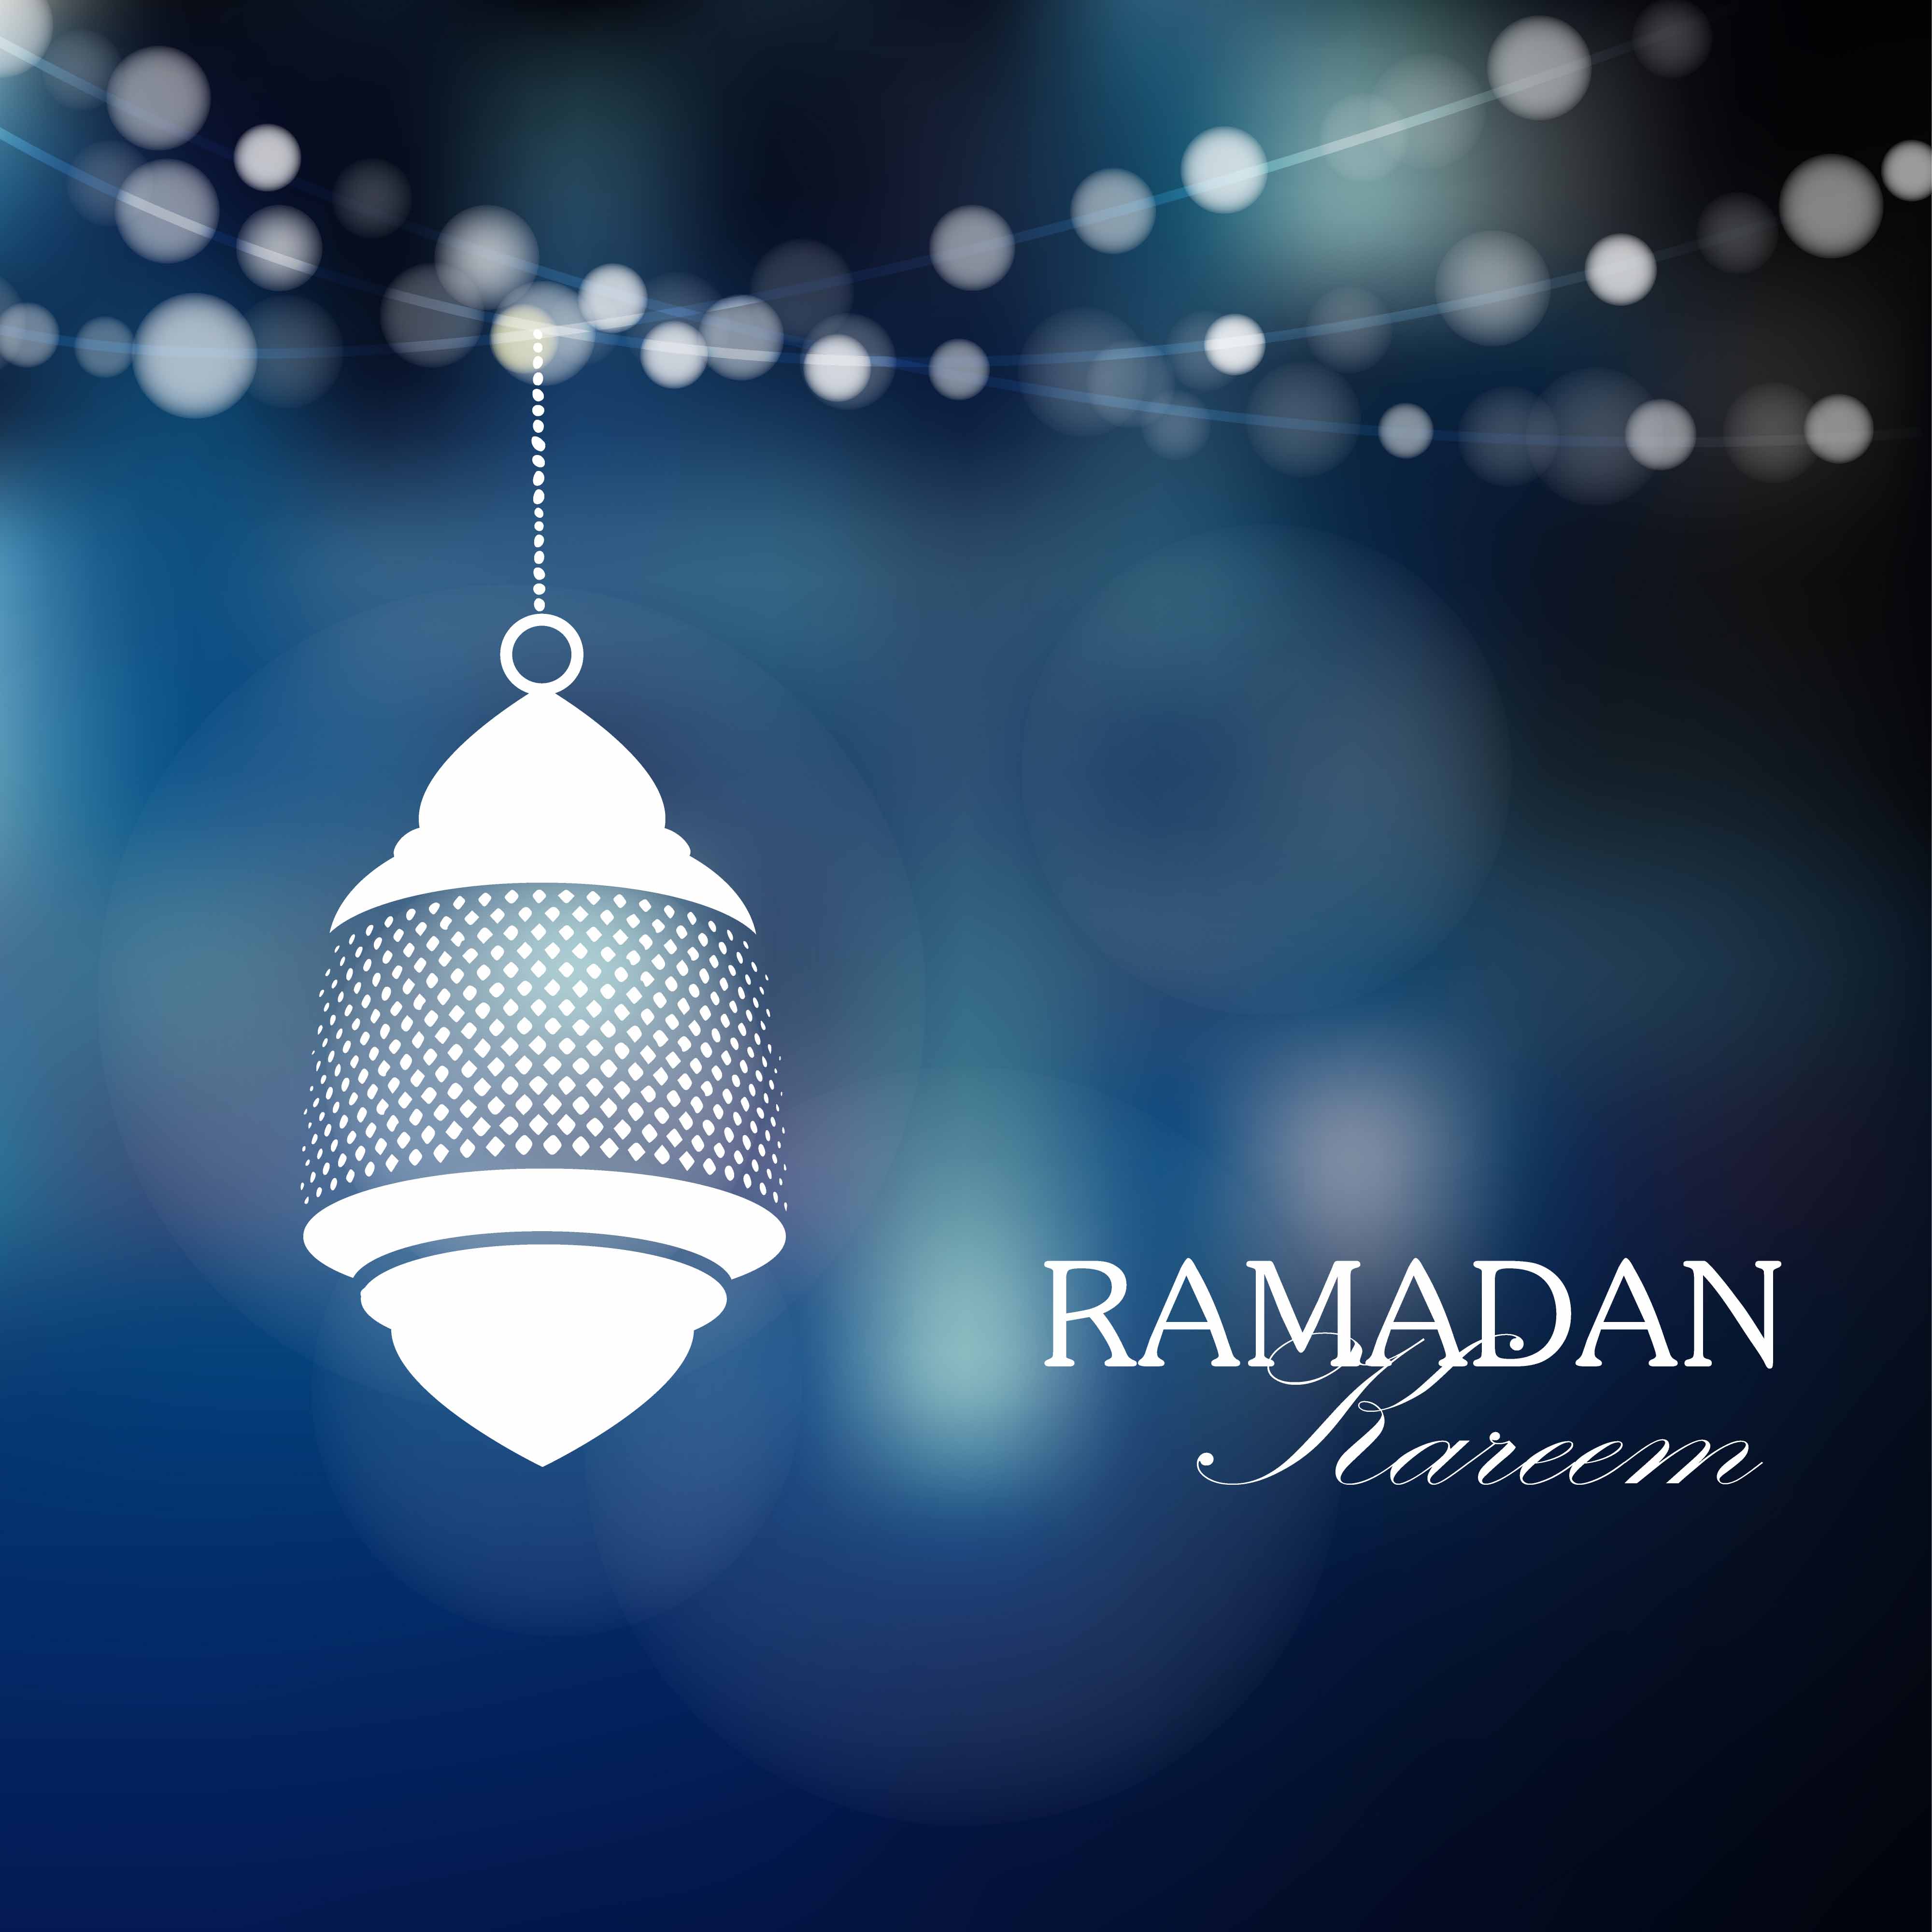 Ramadan 2016 Wallpapers, Cover Photos & Display Pictures - Summer Party Invitation Lights , HD Wallpaper & Backgrounds